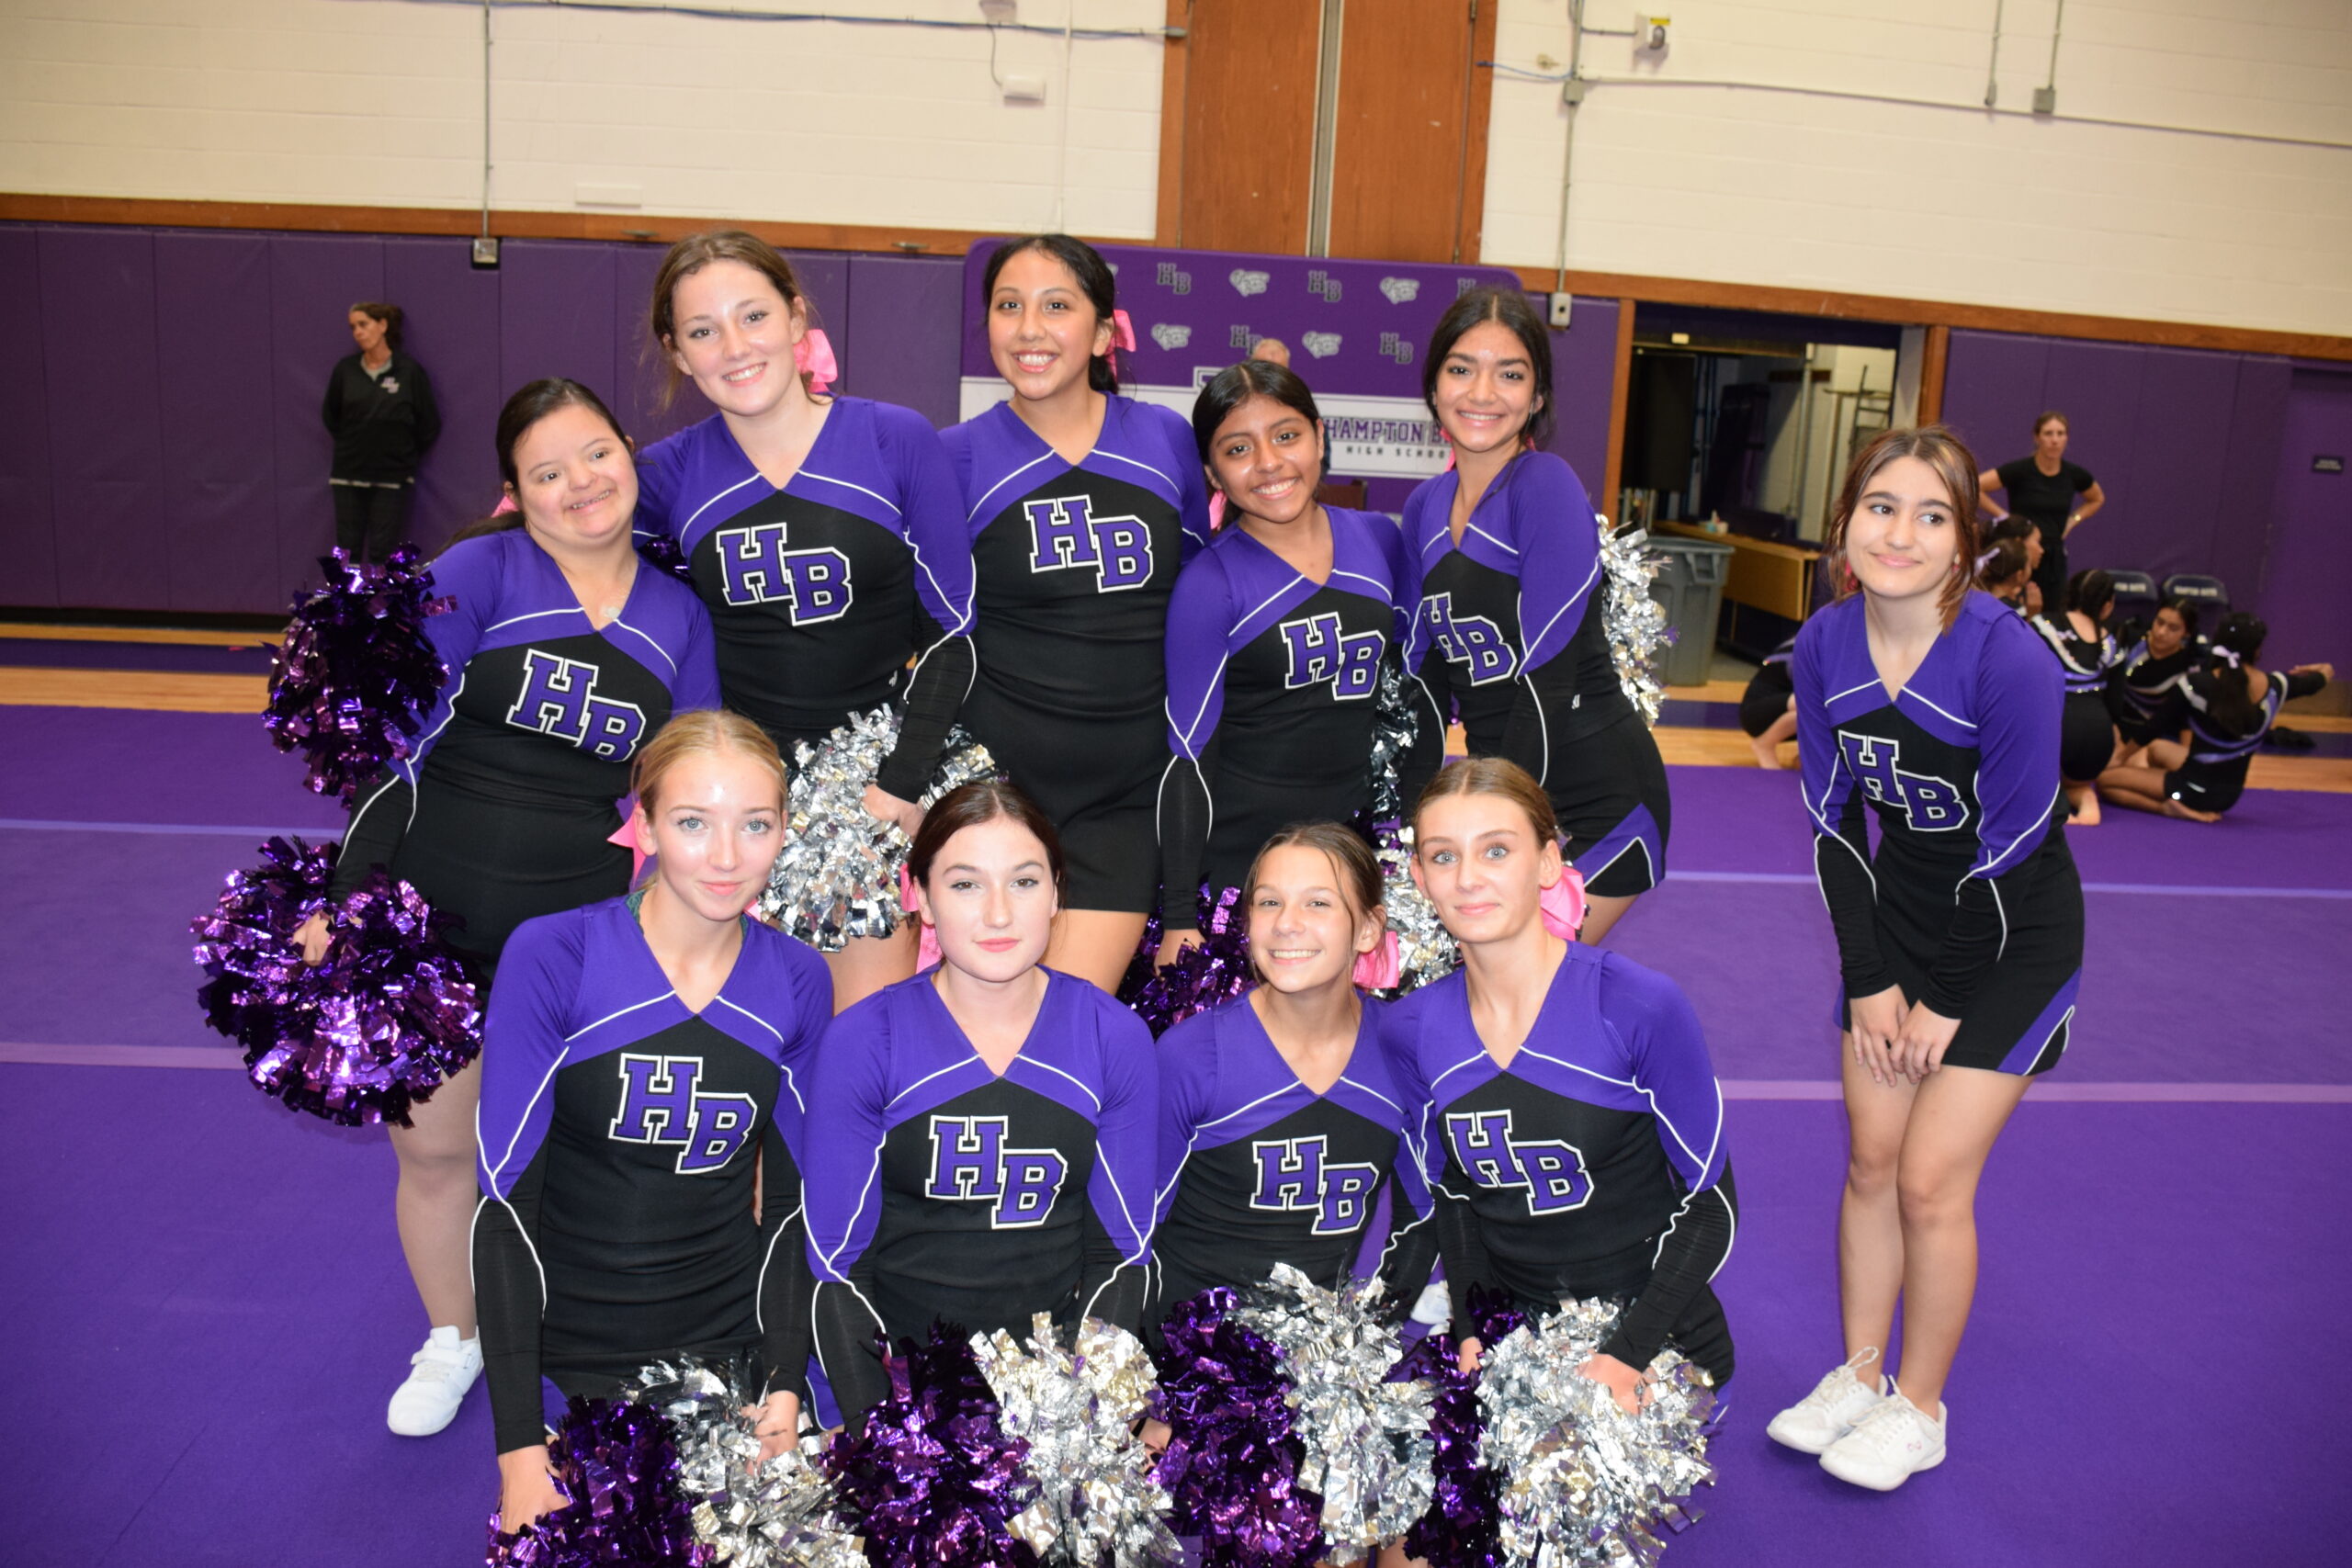 Excitement and pride were in the air as Hampton Bays High School celebrated homecoming during the week of October 10. The week included spirited high school and youth pep rallies, an annual parade and a boys varsity soccer game under the lights. COURTESY HAMPTON BAYS HIGH SCHOOL